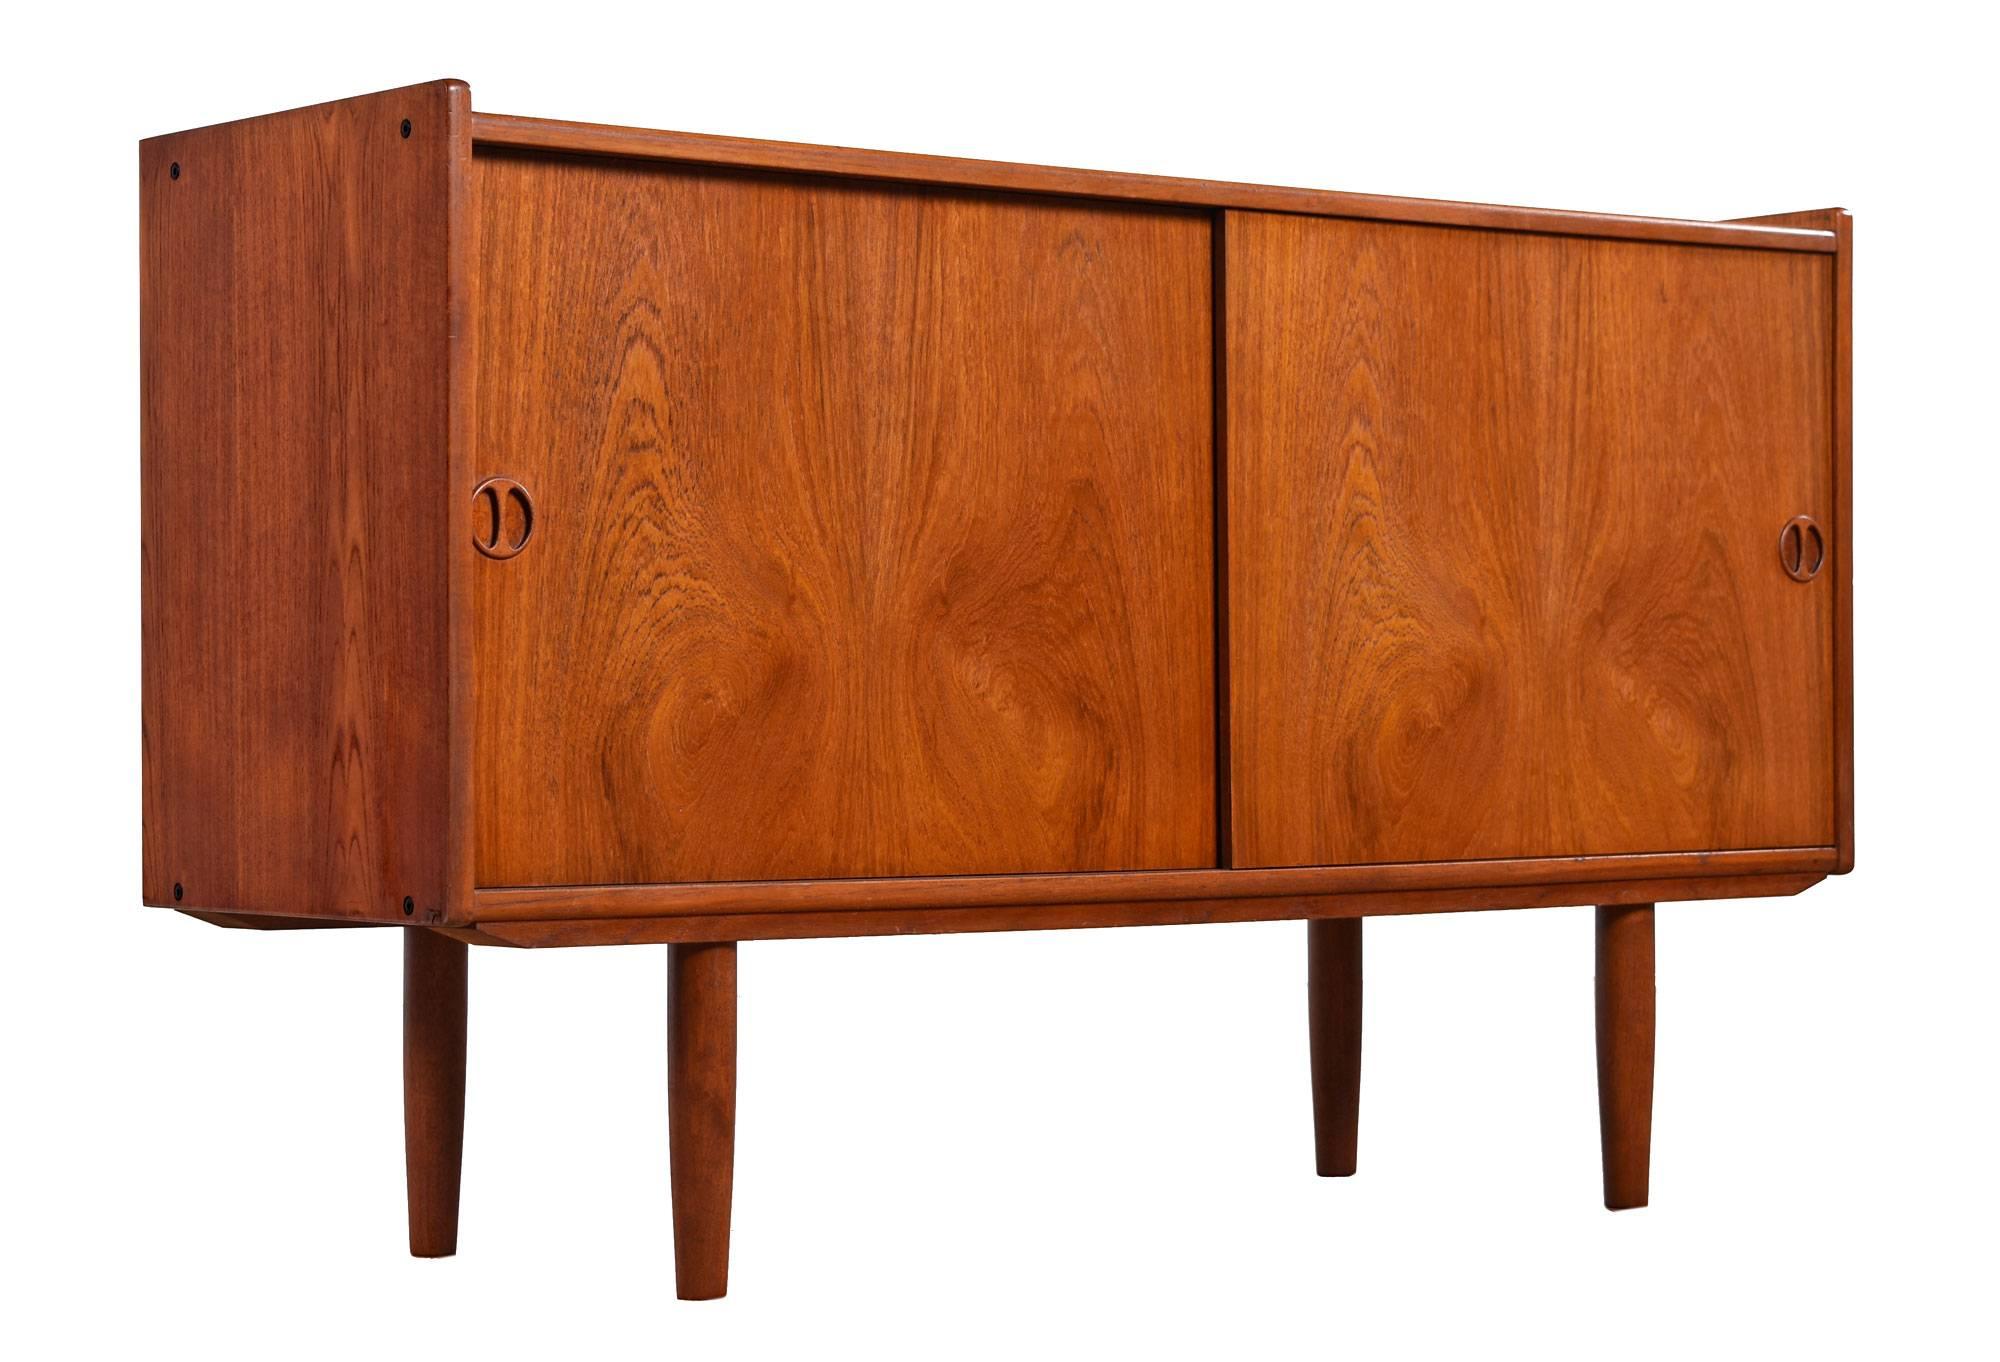 Handsome restored Mid-Century Modern, Danish teak credenza by Jydsk Mobelindusti of Skanderborg, Denmark. The unit still bears the maker's mark on the back side. This early piece has deep red/orange patina to the half-a-century old teak wood. Ideal